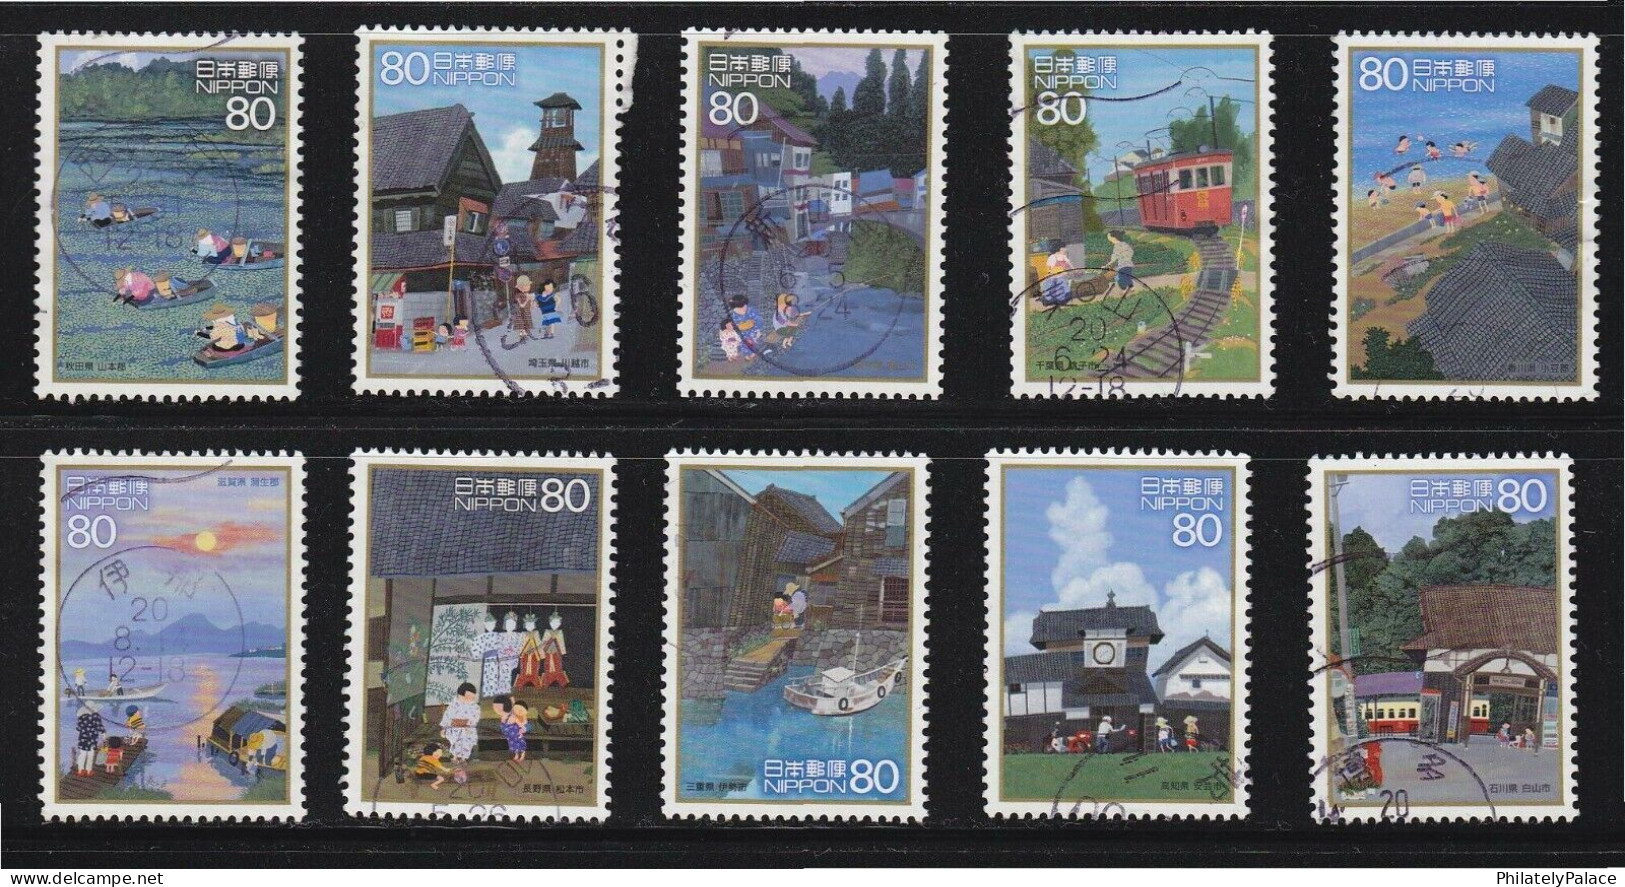 JAPAN 2008 (PREFECTURE) HOMETOWNS SCENES IN MY HEART (AUTUMN) S2, 10 STAMPS USED (**) - Used Stamps